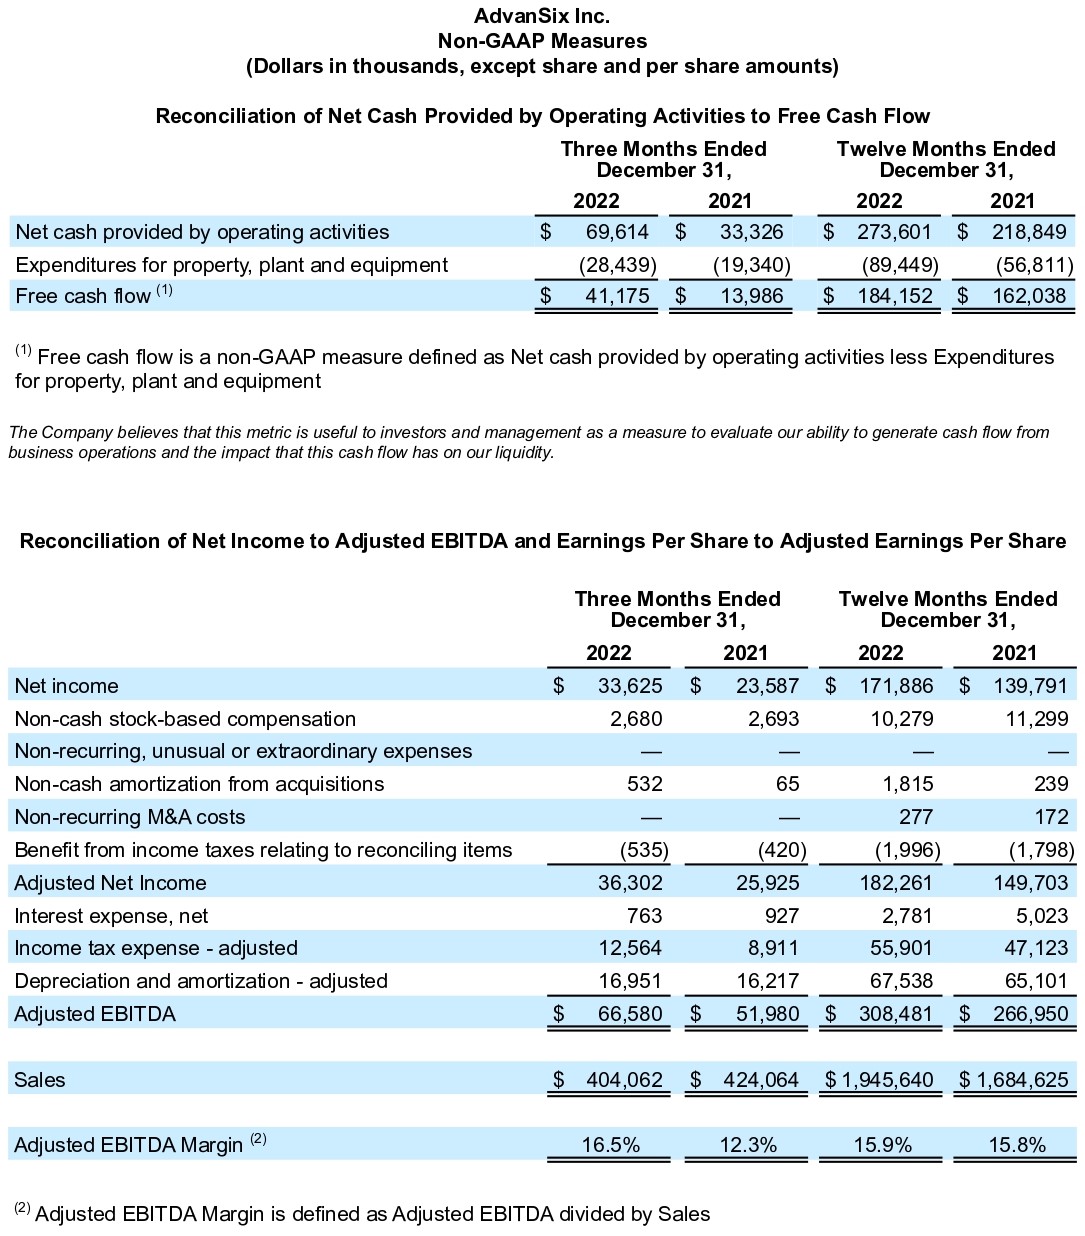 Table - AdvanSix Inc. Non-GAAP Measures Fourth Quarter And Full Year 2022 Financial Results. Reconciliation of Net Cash Provided by Operating Activities to Free Cash Flow